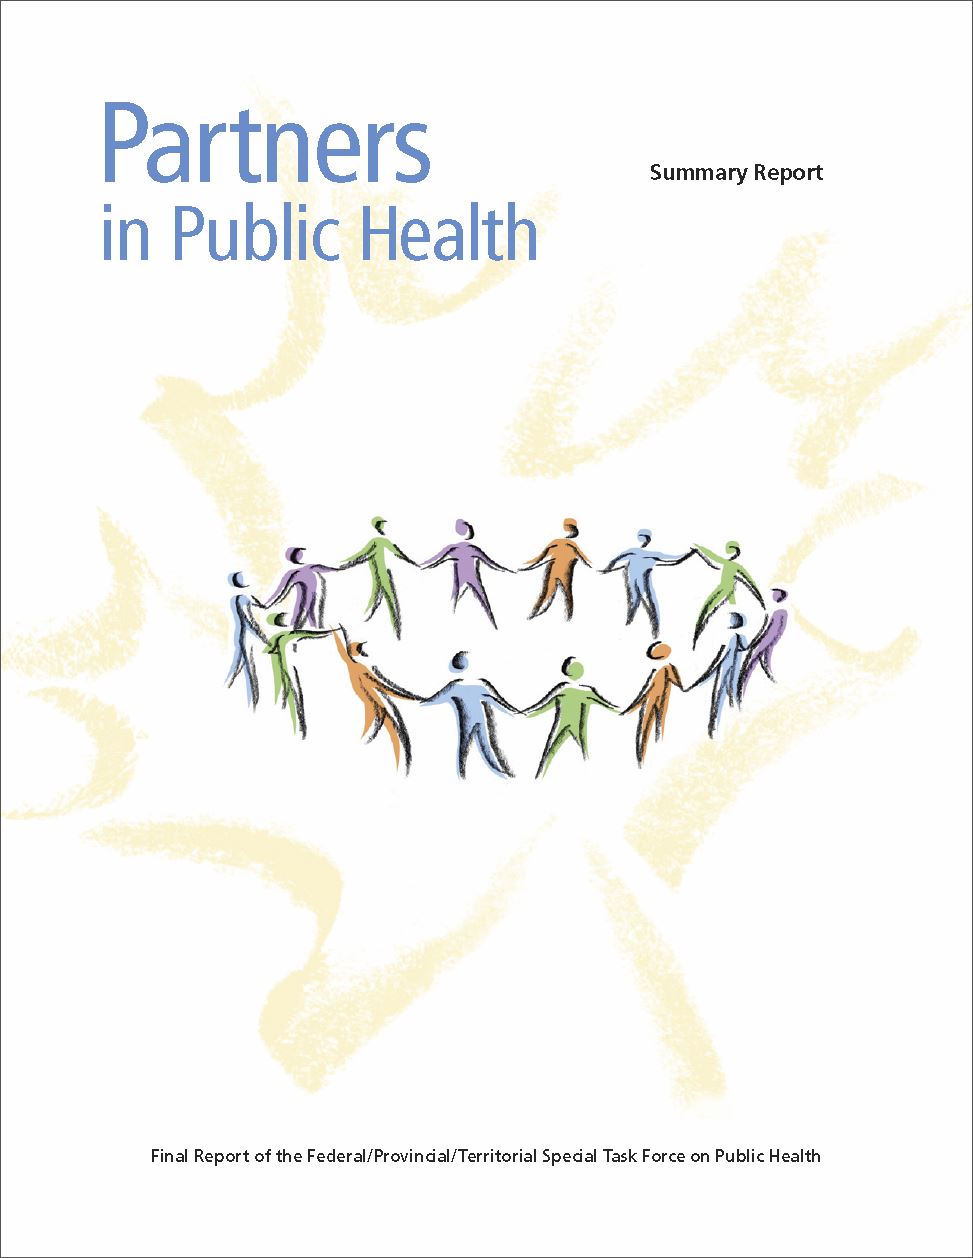 Image of a Partners in Health Summary Report cover page in English